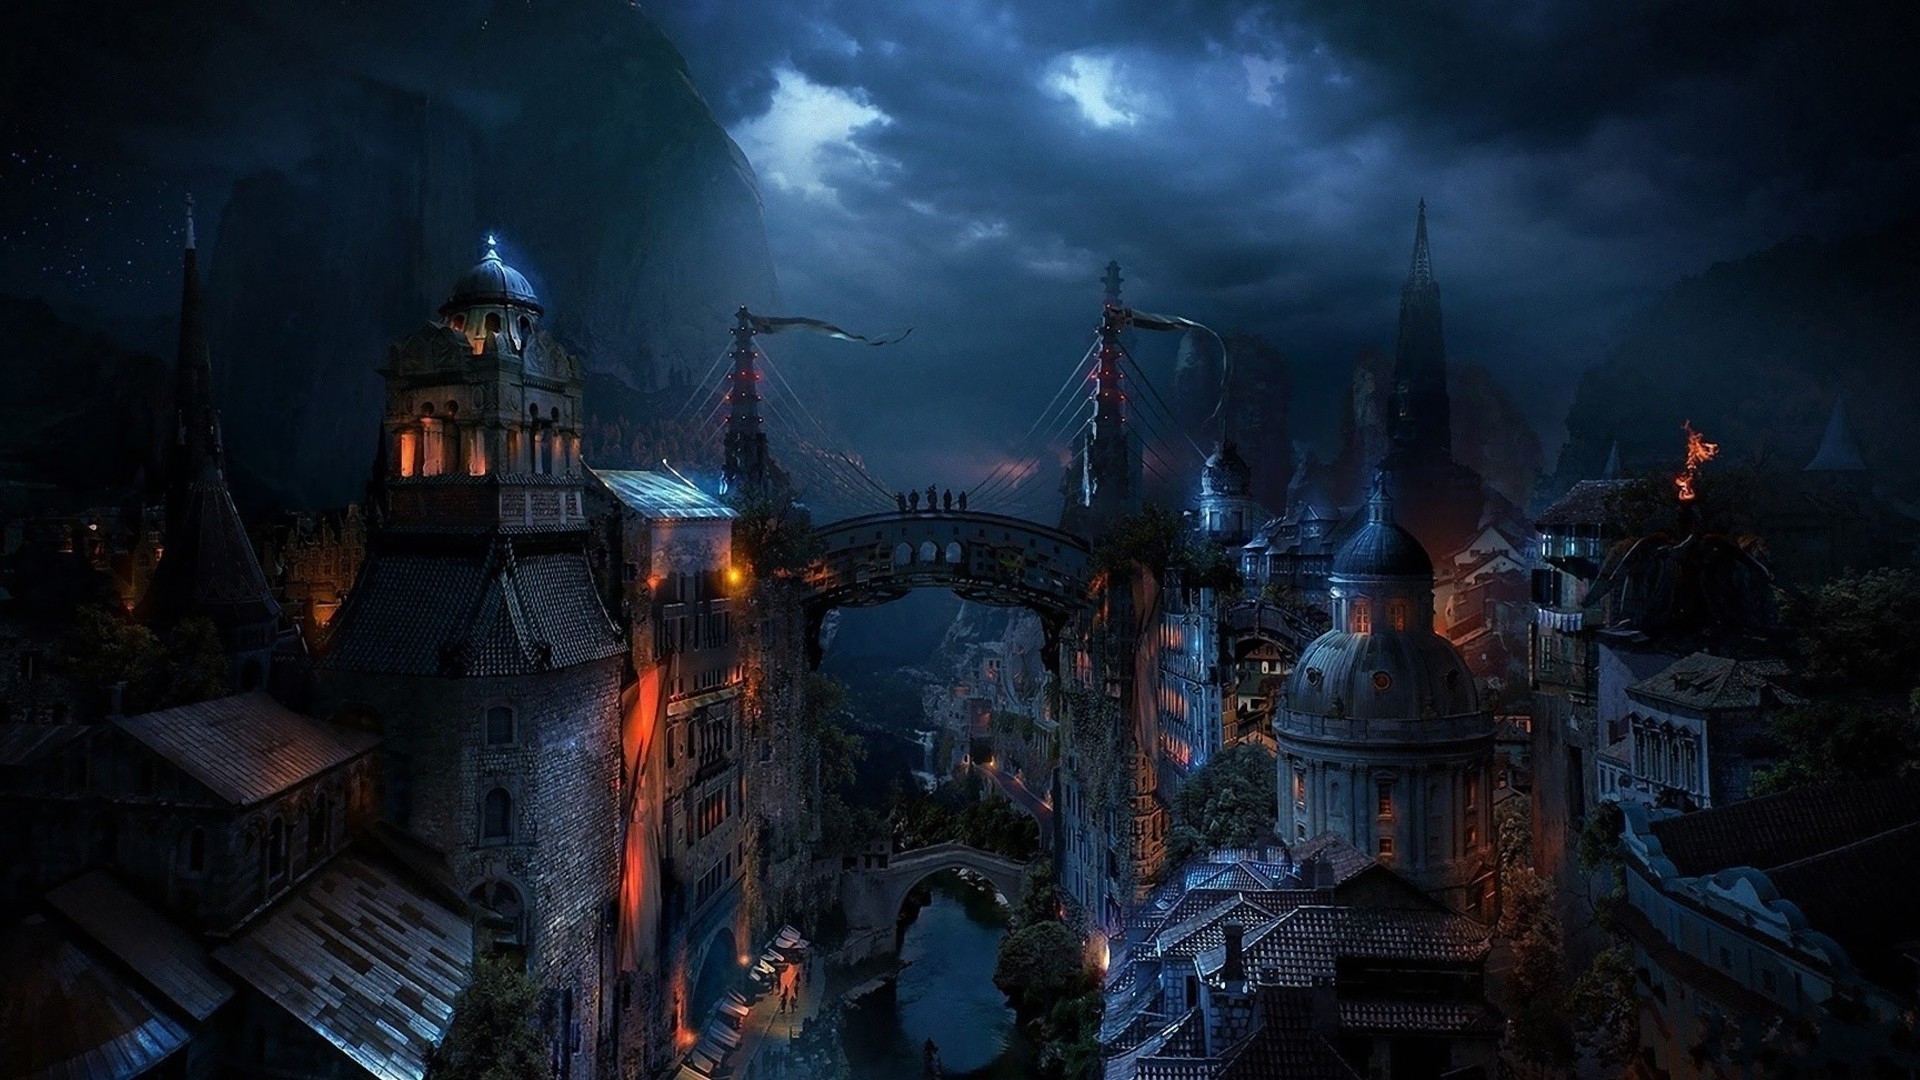 Image – Dark medieval city fantasy hd wallpaper 1920×1080 2069 Constructed Worlds Wiki FANDOM powered by Wikia